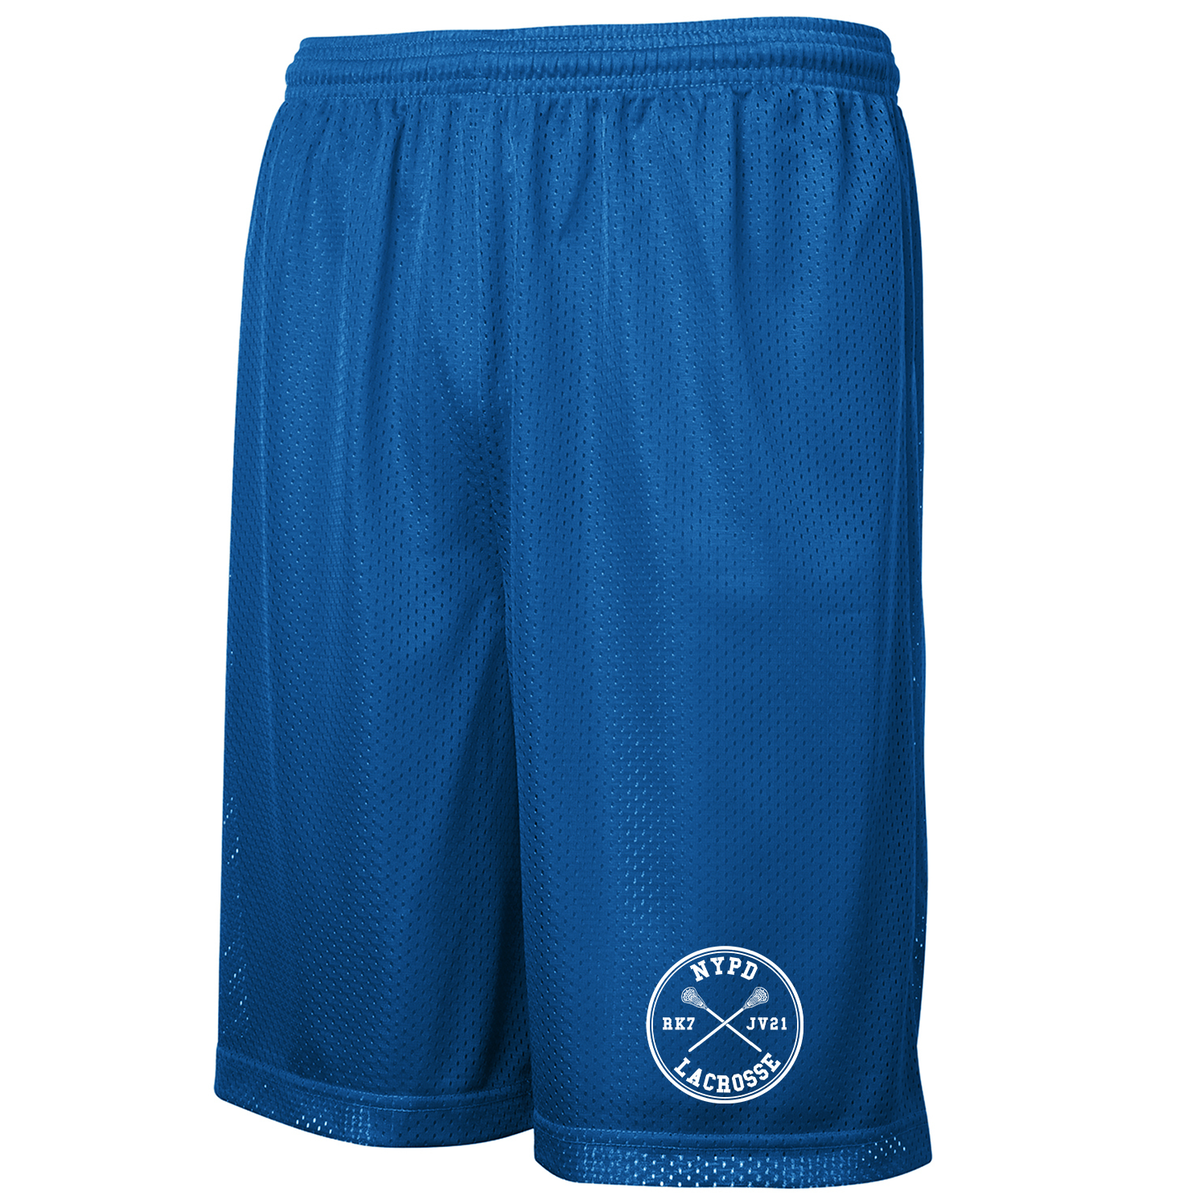 NYPD Lacrosse Classic Mesh Shorts